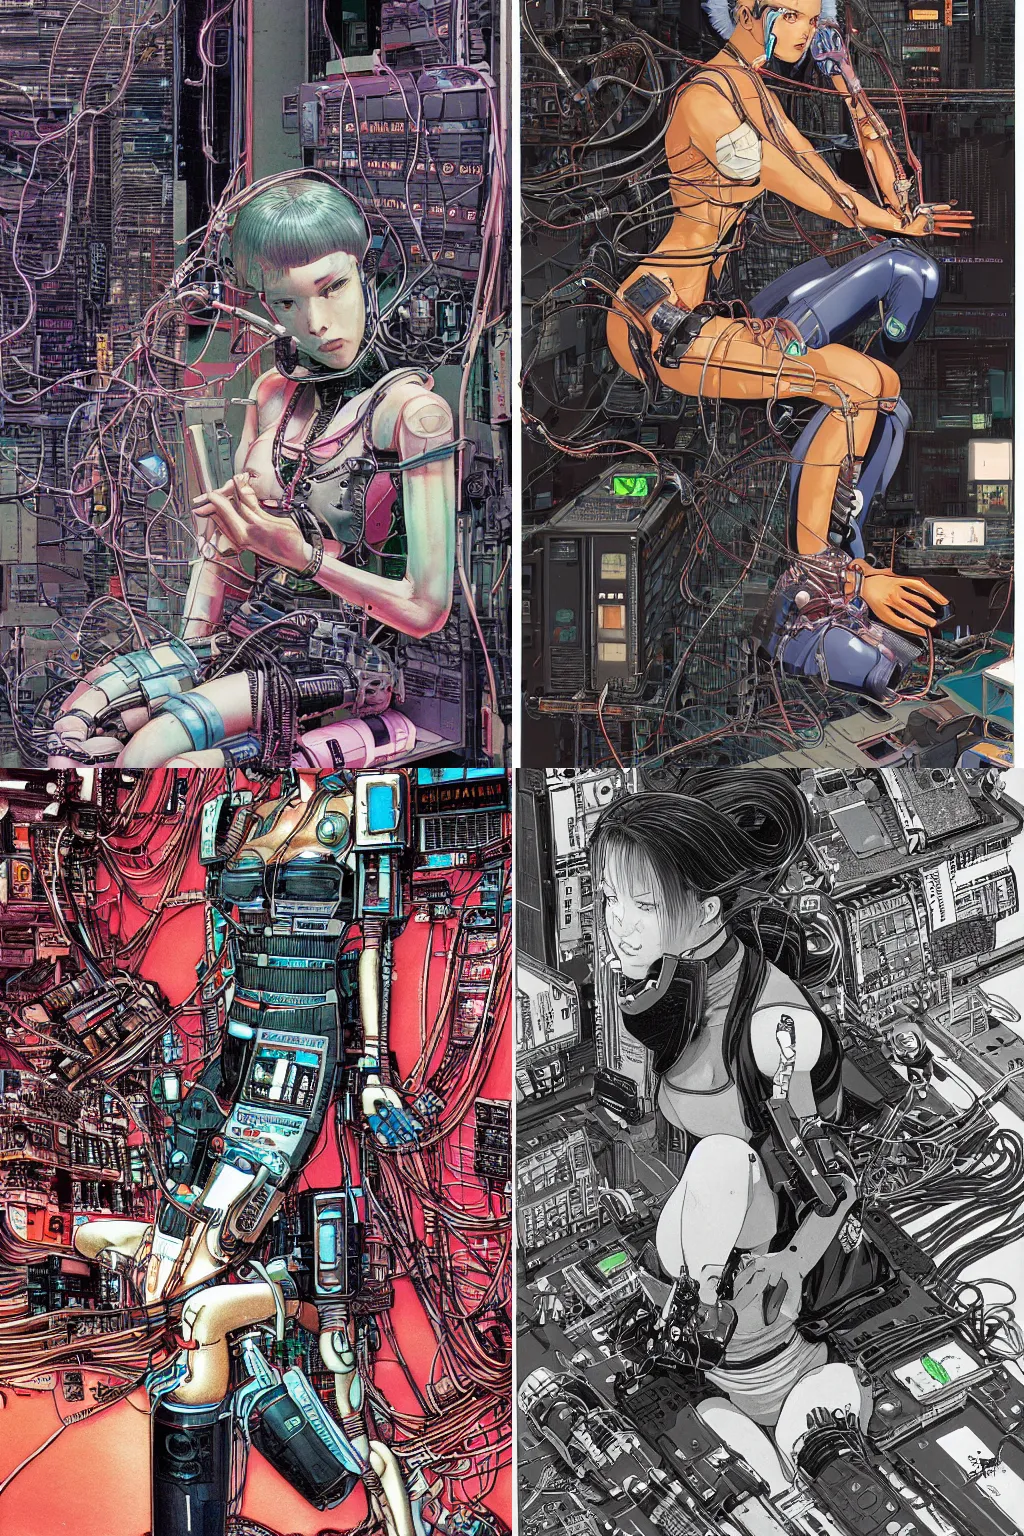 Prompt: an hyper-detailed cyberpunk illustration of a female android seated on the floor in a tech labor, seen from the side with her body open showing m cables and wires coming out, by masamune shirow, and katsuhiro otomo, japan, 1980s, centered, colorful